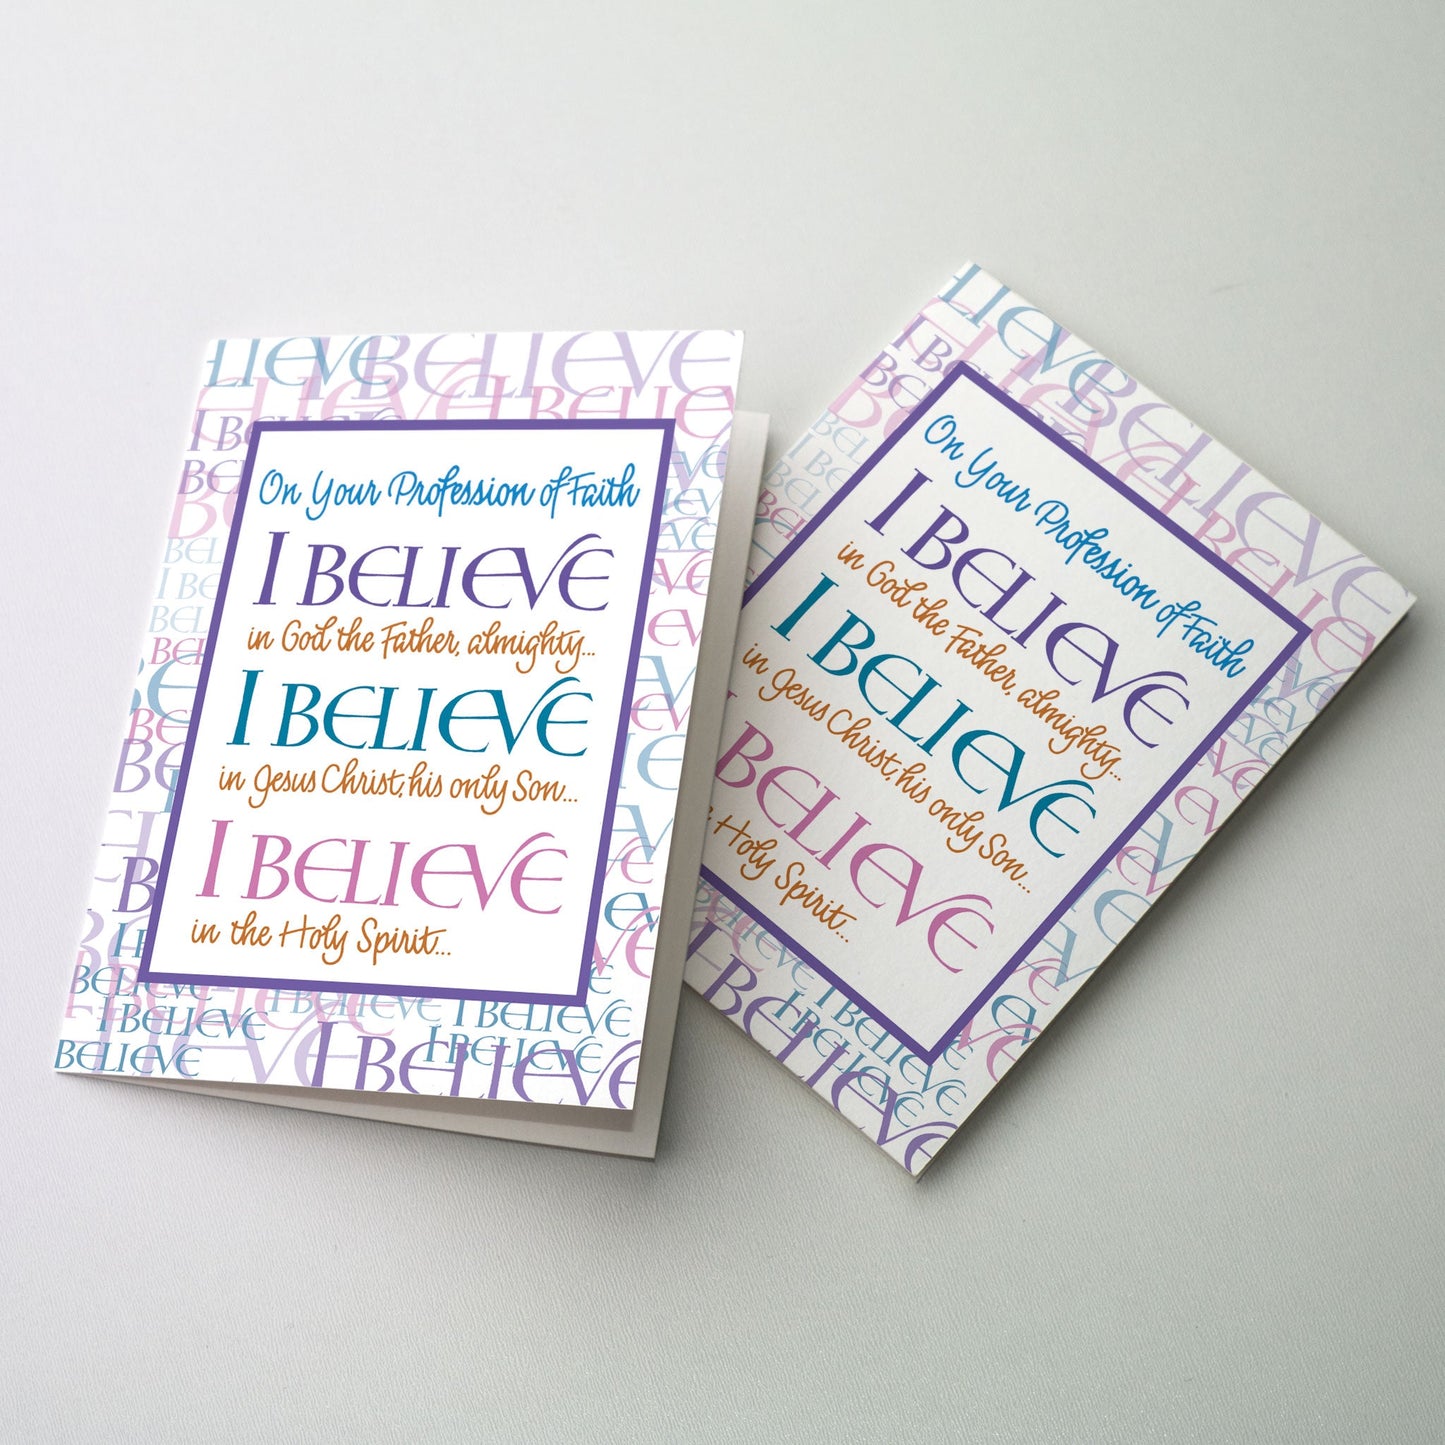 &quot;I believe&quot; treated as a background pattern with central lettering panel